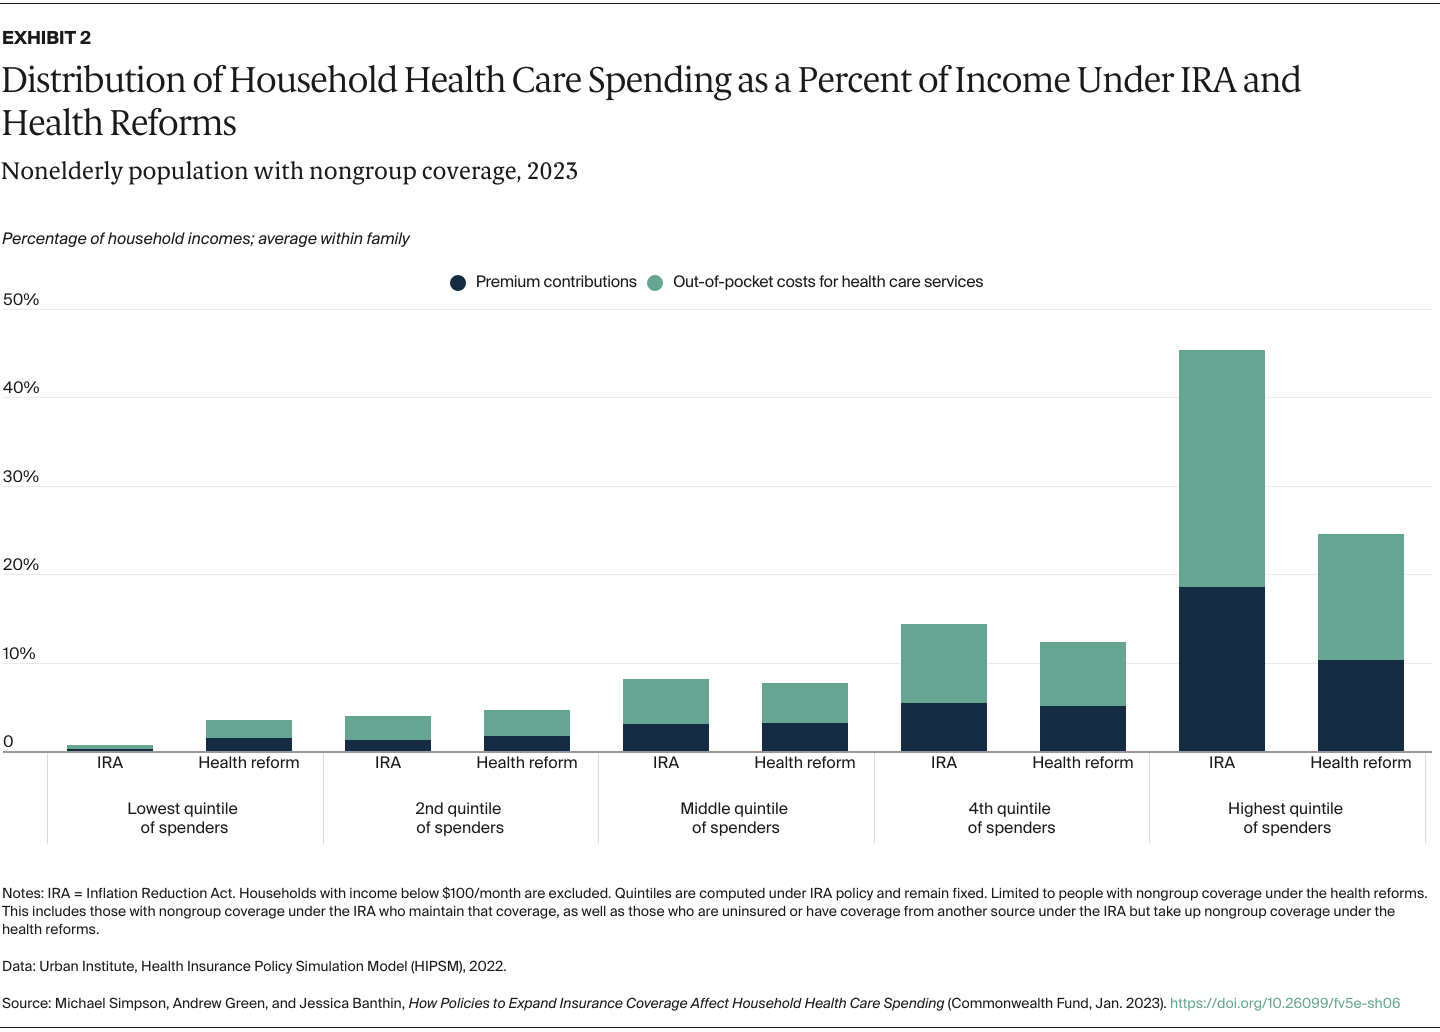 Simpson_policies_expand_coverage_household_spending_Exhibit_02